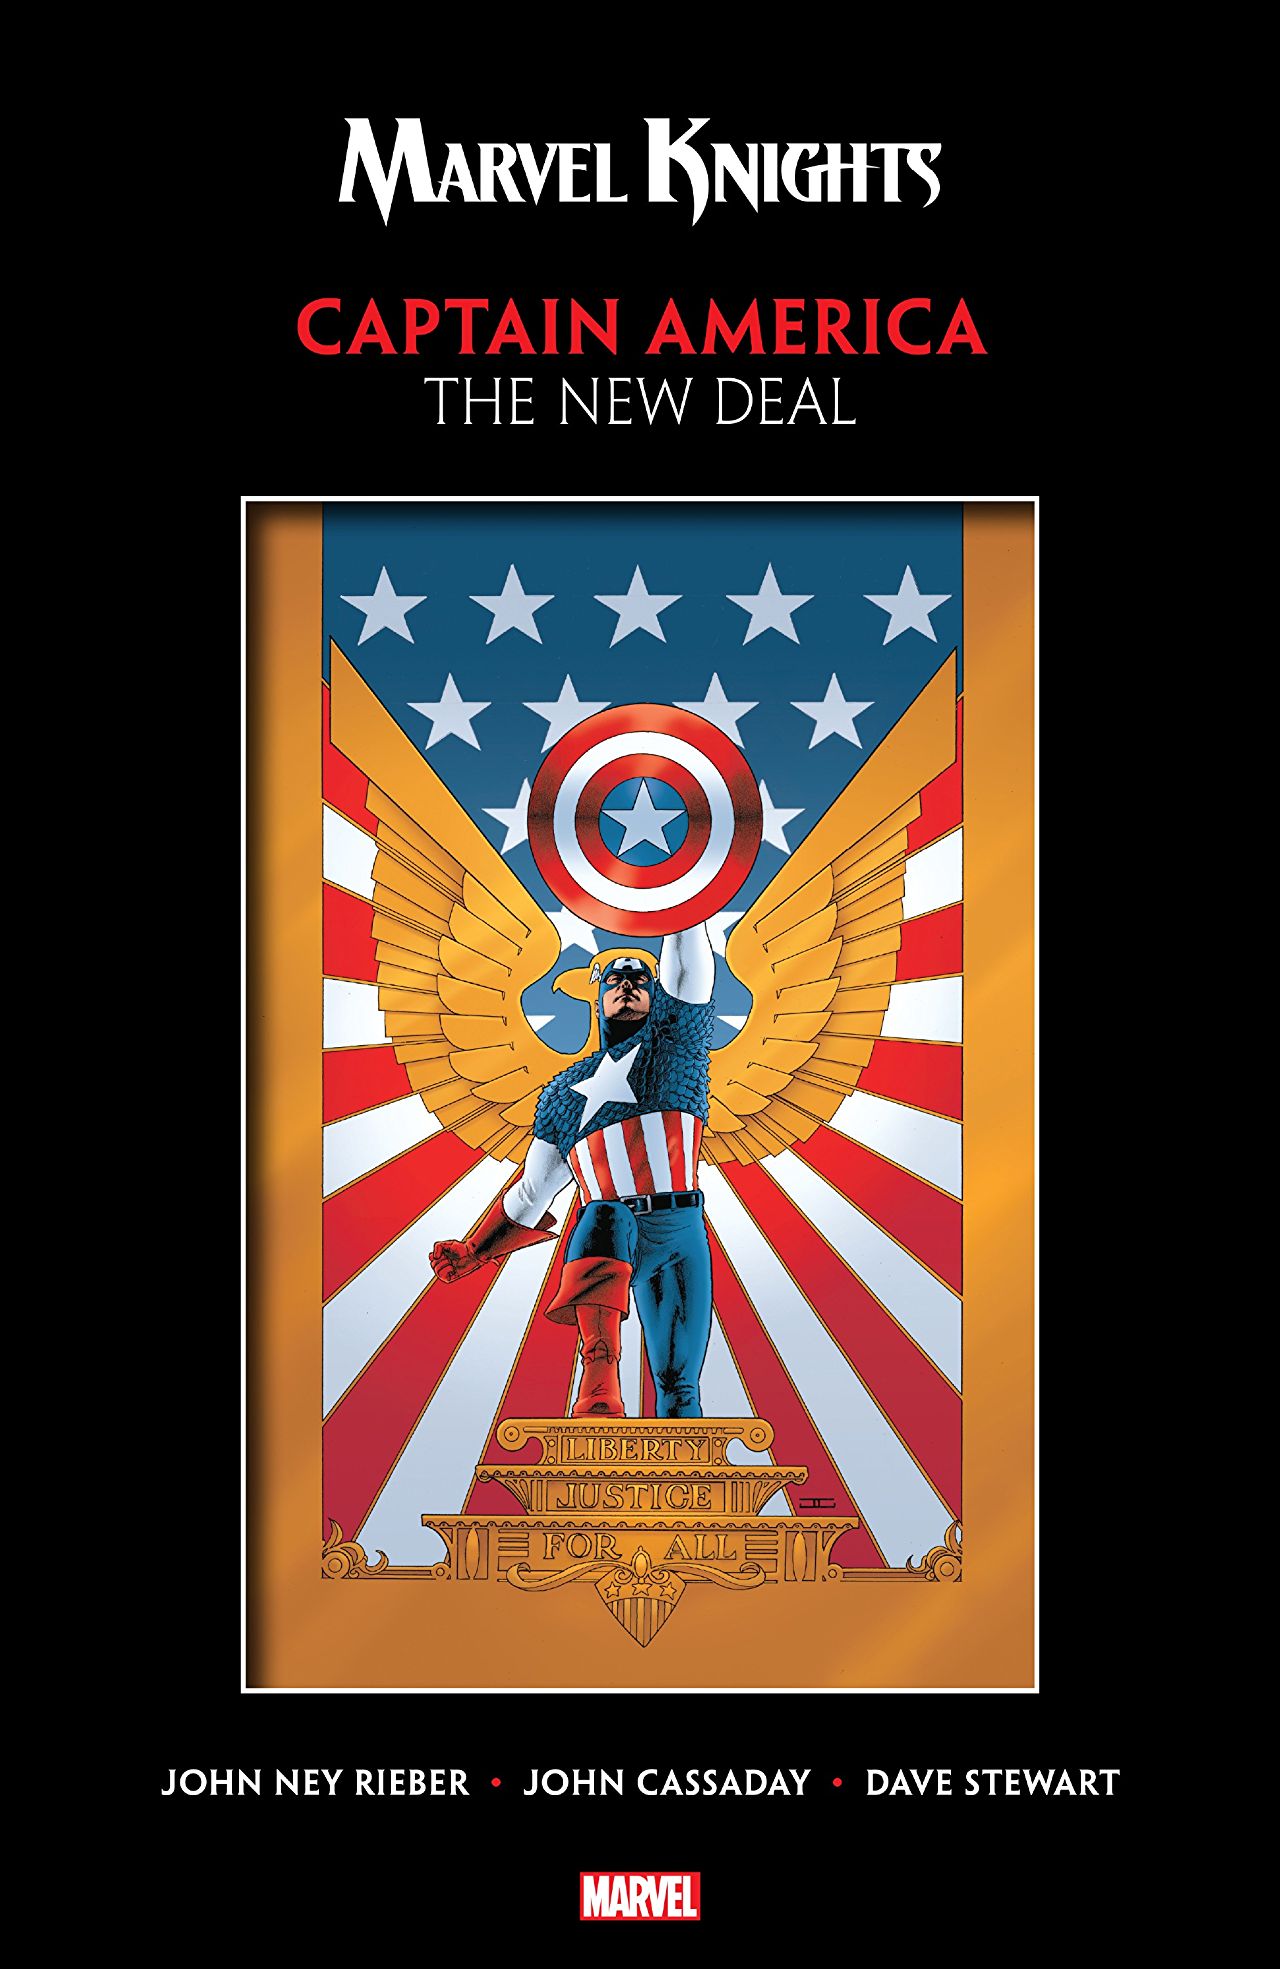 'Marvel Knights Captain America by Rieber and Cassaday: The New Deal' is a powerful time capsule of a book